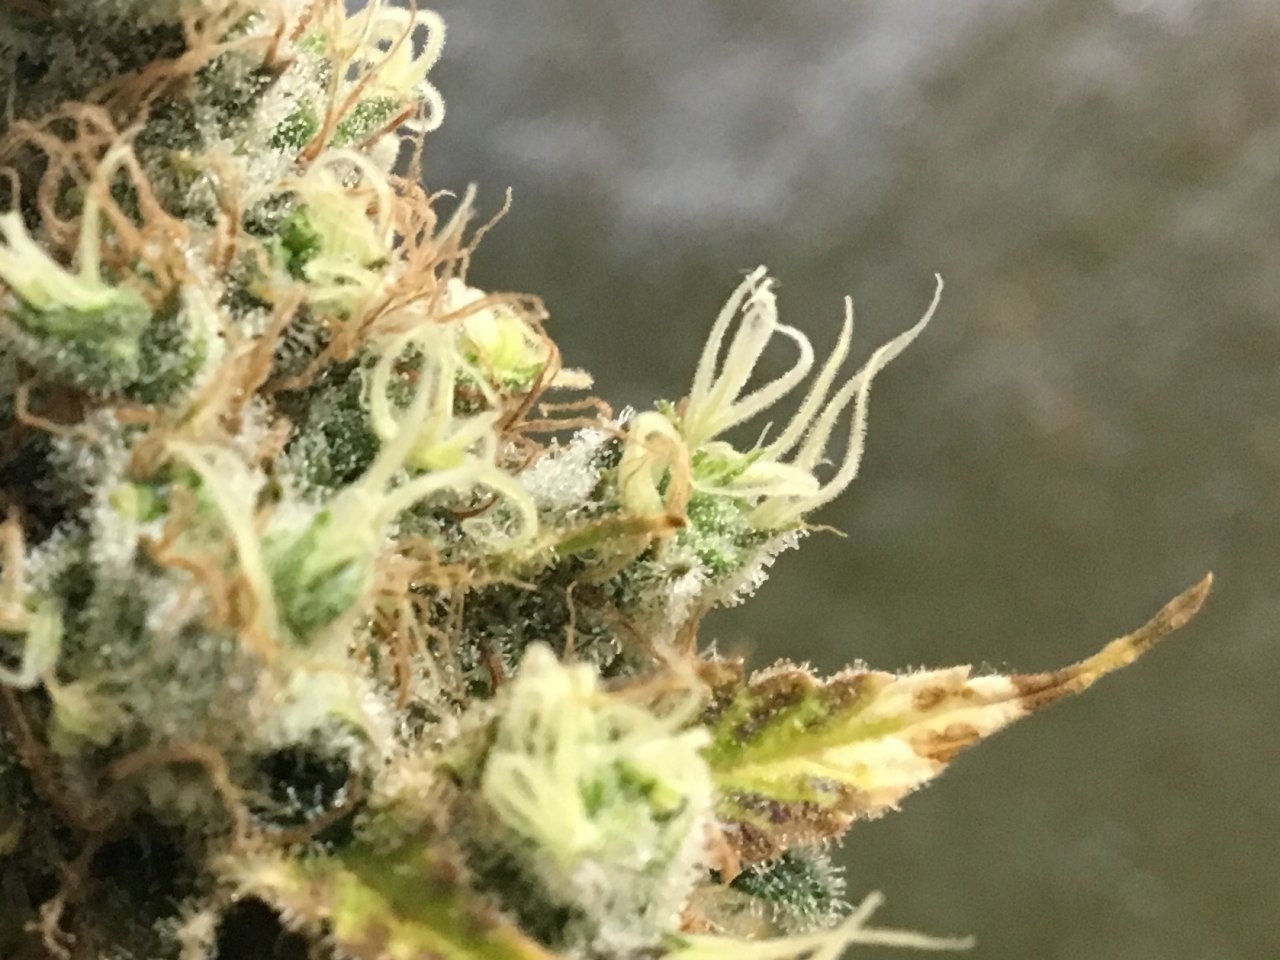 Trichomes marching along the edges